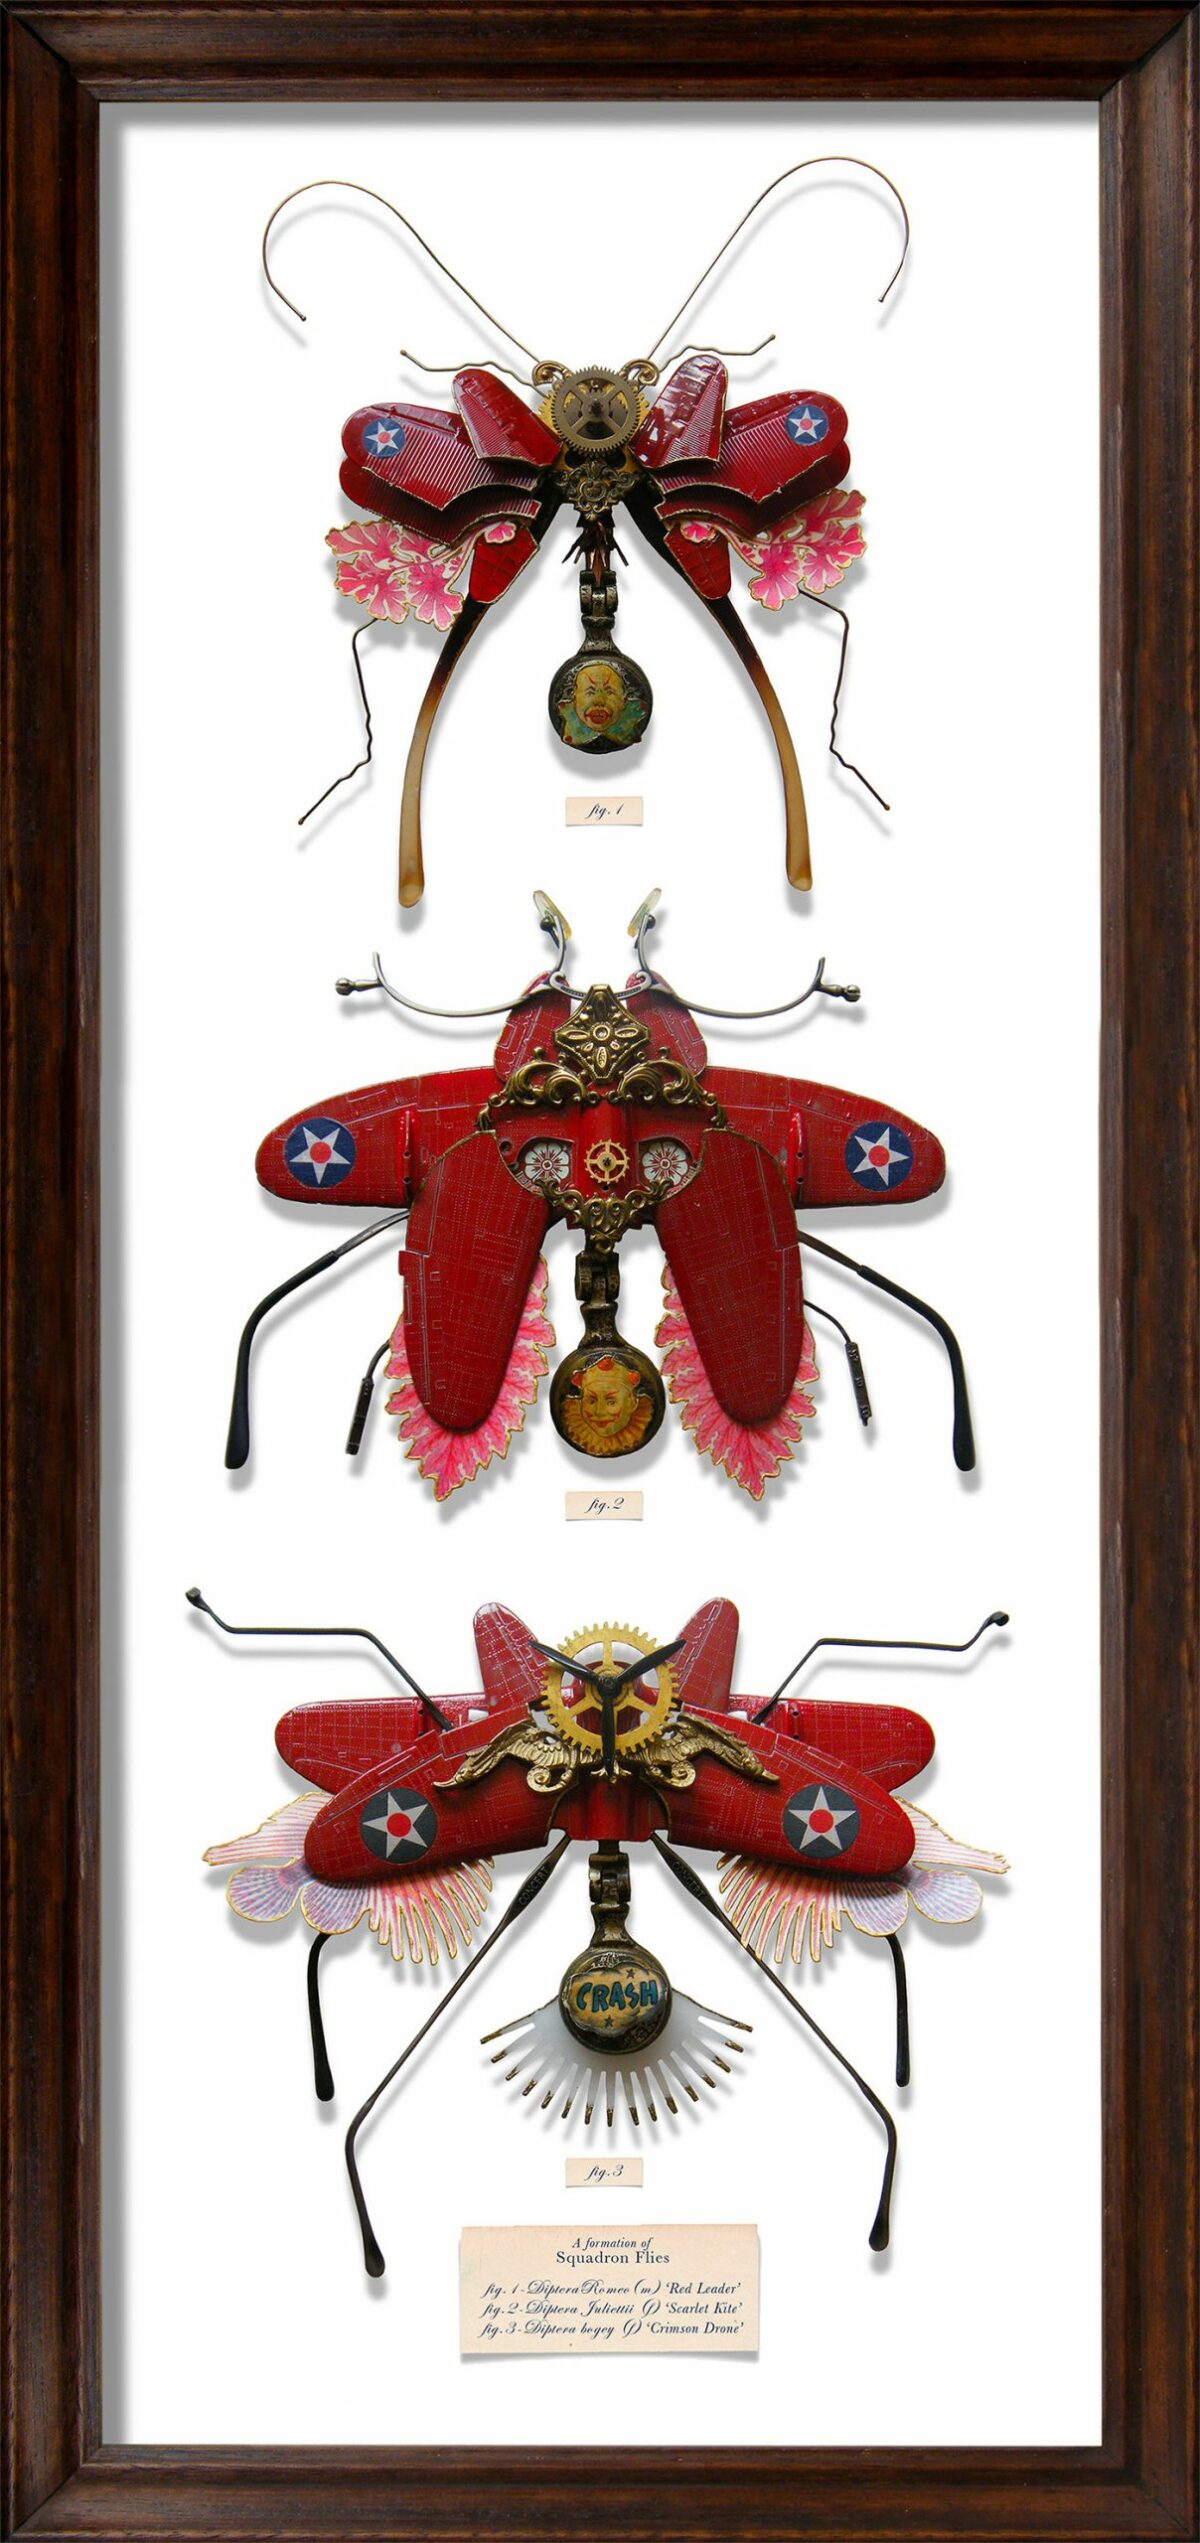 Litter Bugs Incredible Insect Found Object Sculptures By Mark Oliver (19)